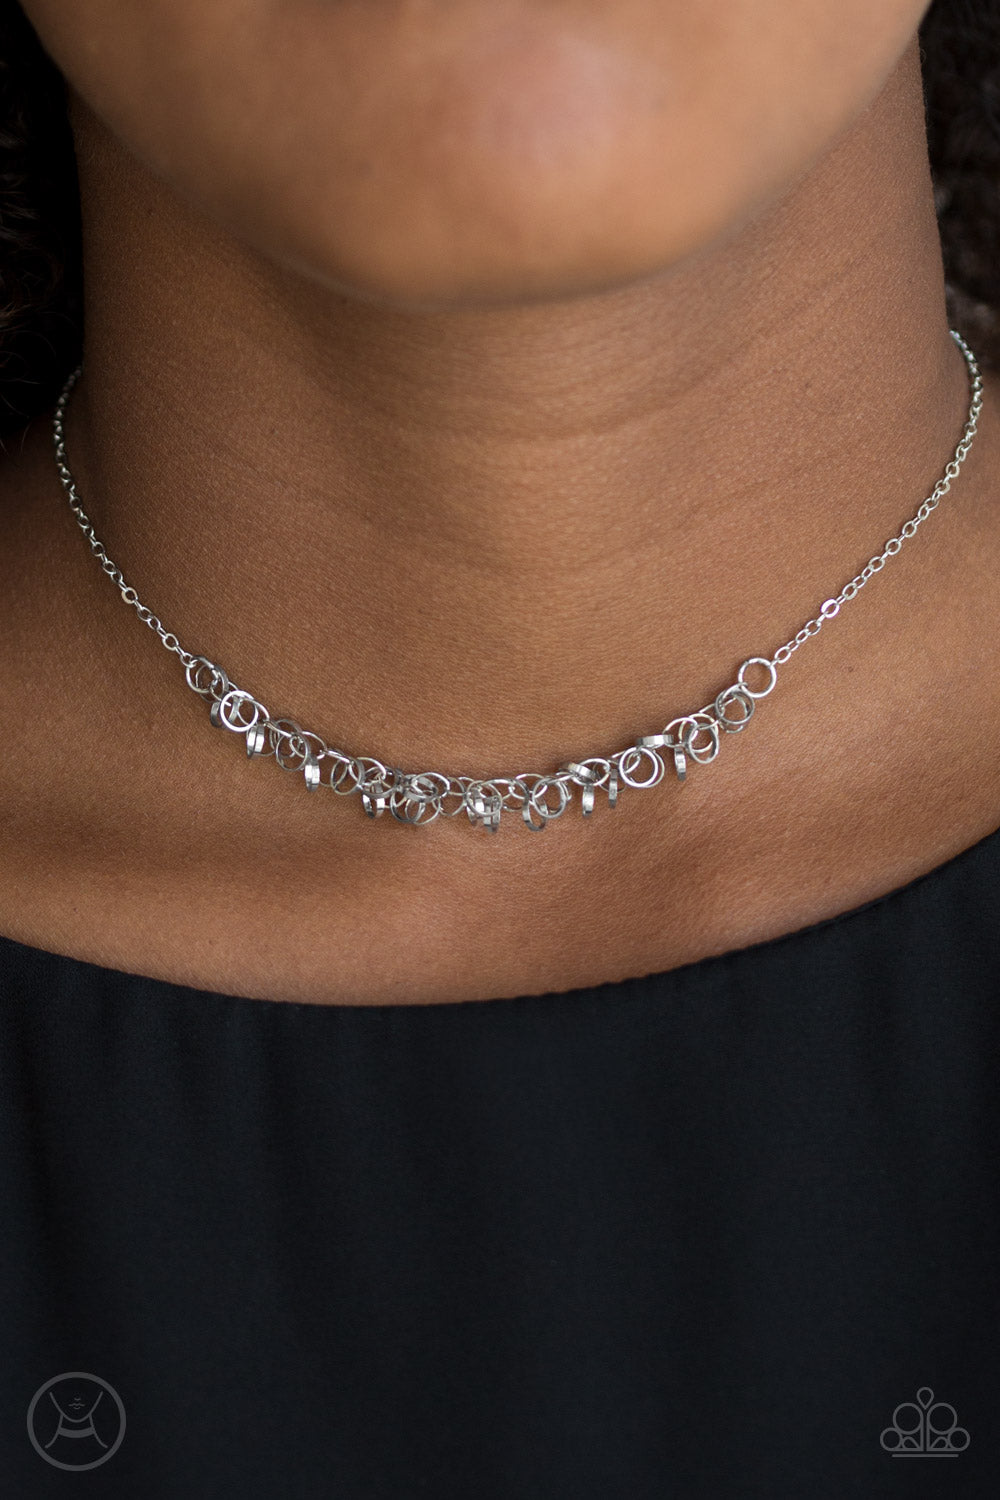 Cat Got Your Tongue? Silver Choker-Necklace